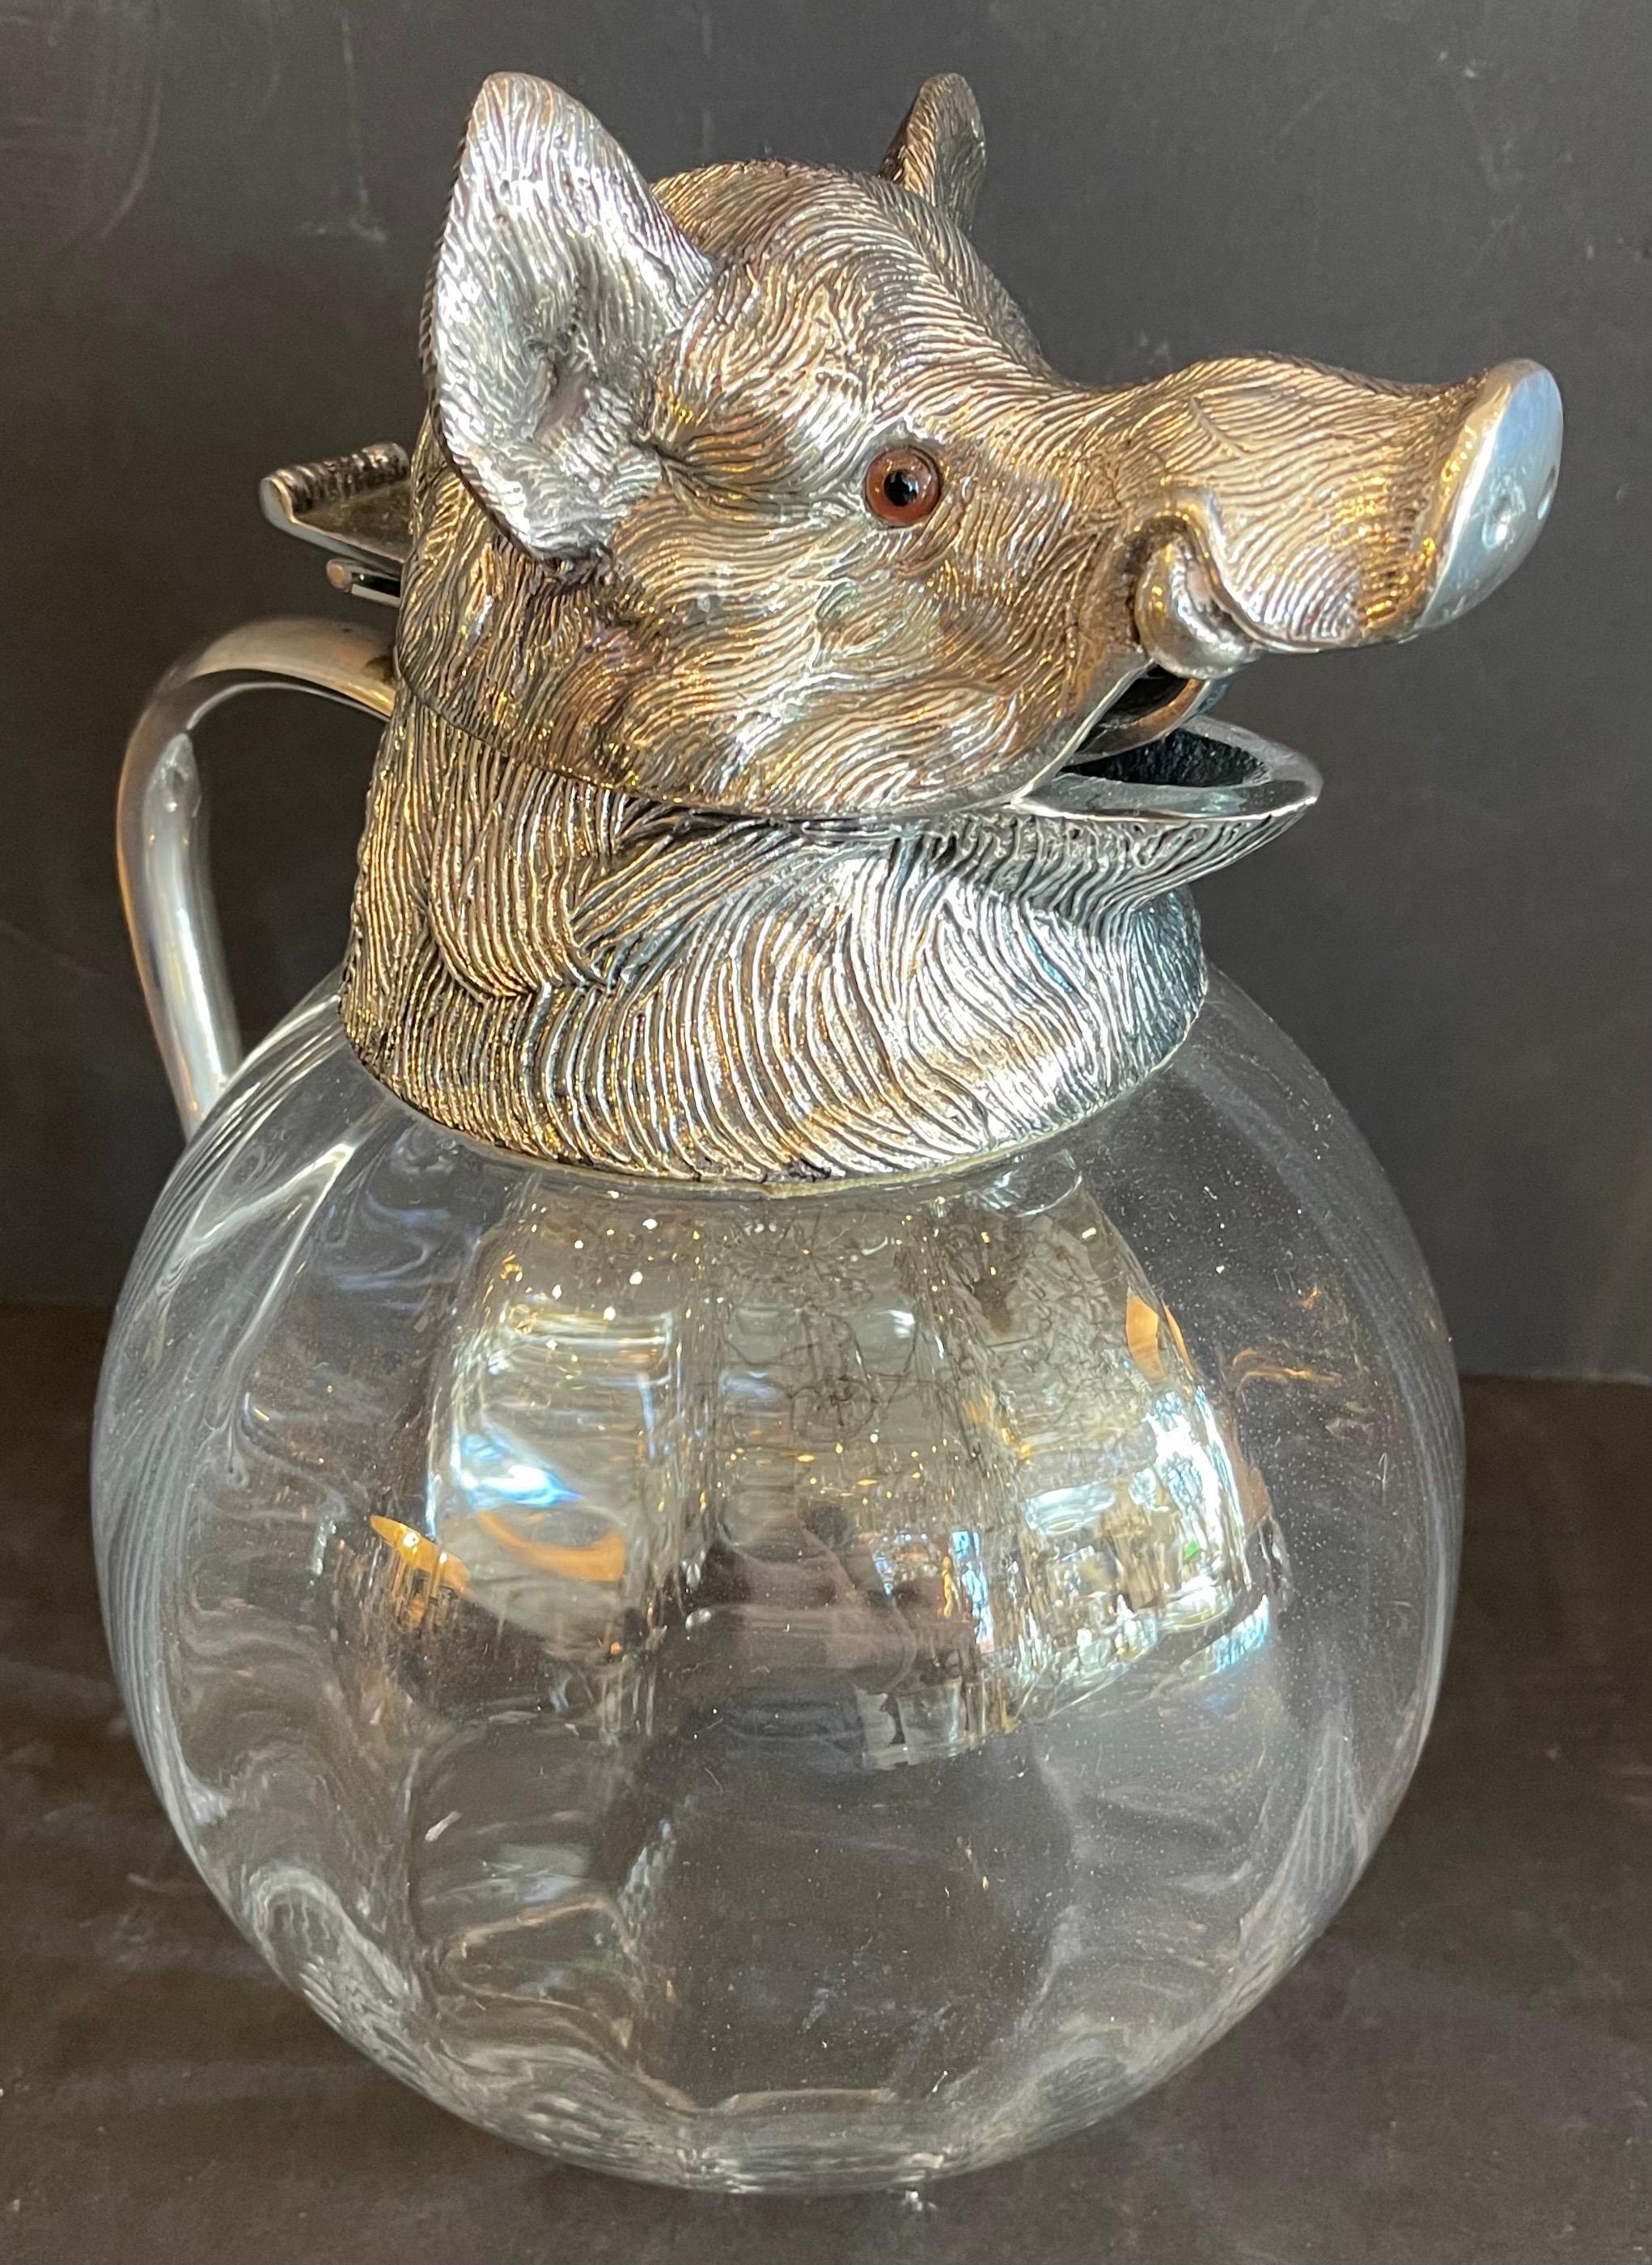 20th Century Wonderful Wild Boar Silver Plated Carafe Lidded Decanter Pitcher Valenti Spain